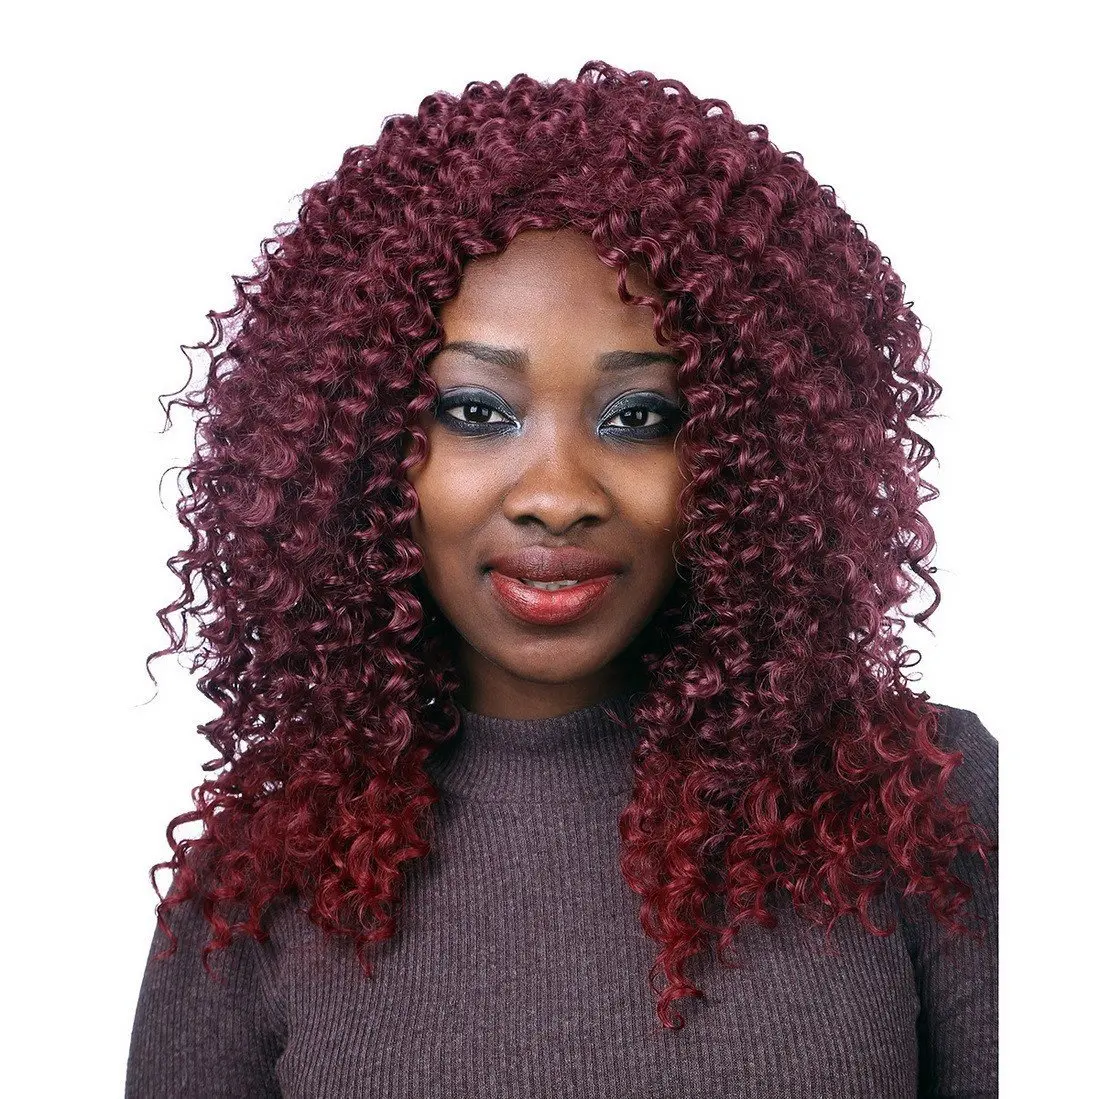 A.Monamour Dark Red Medium Long Afro Kinky Curly Synthetic Hair Full Wig fo...